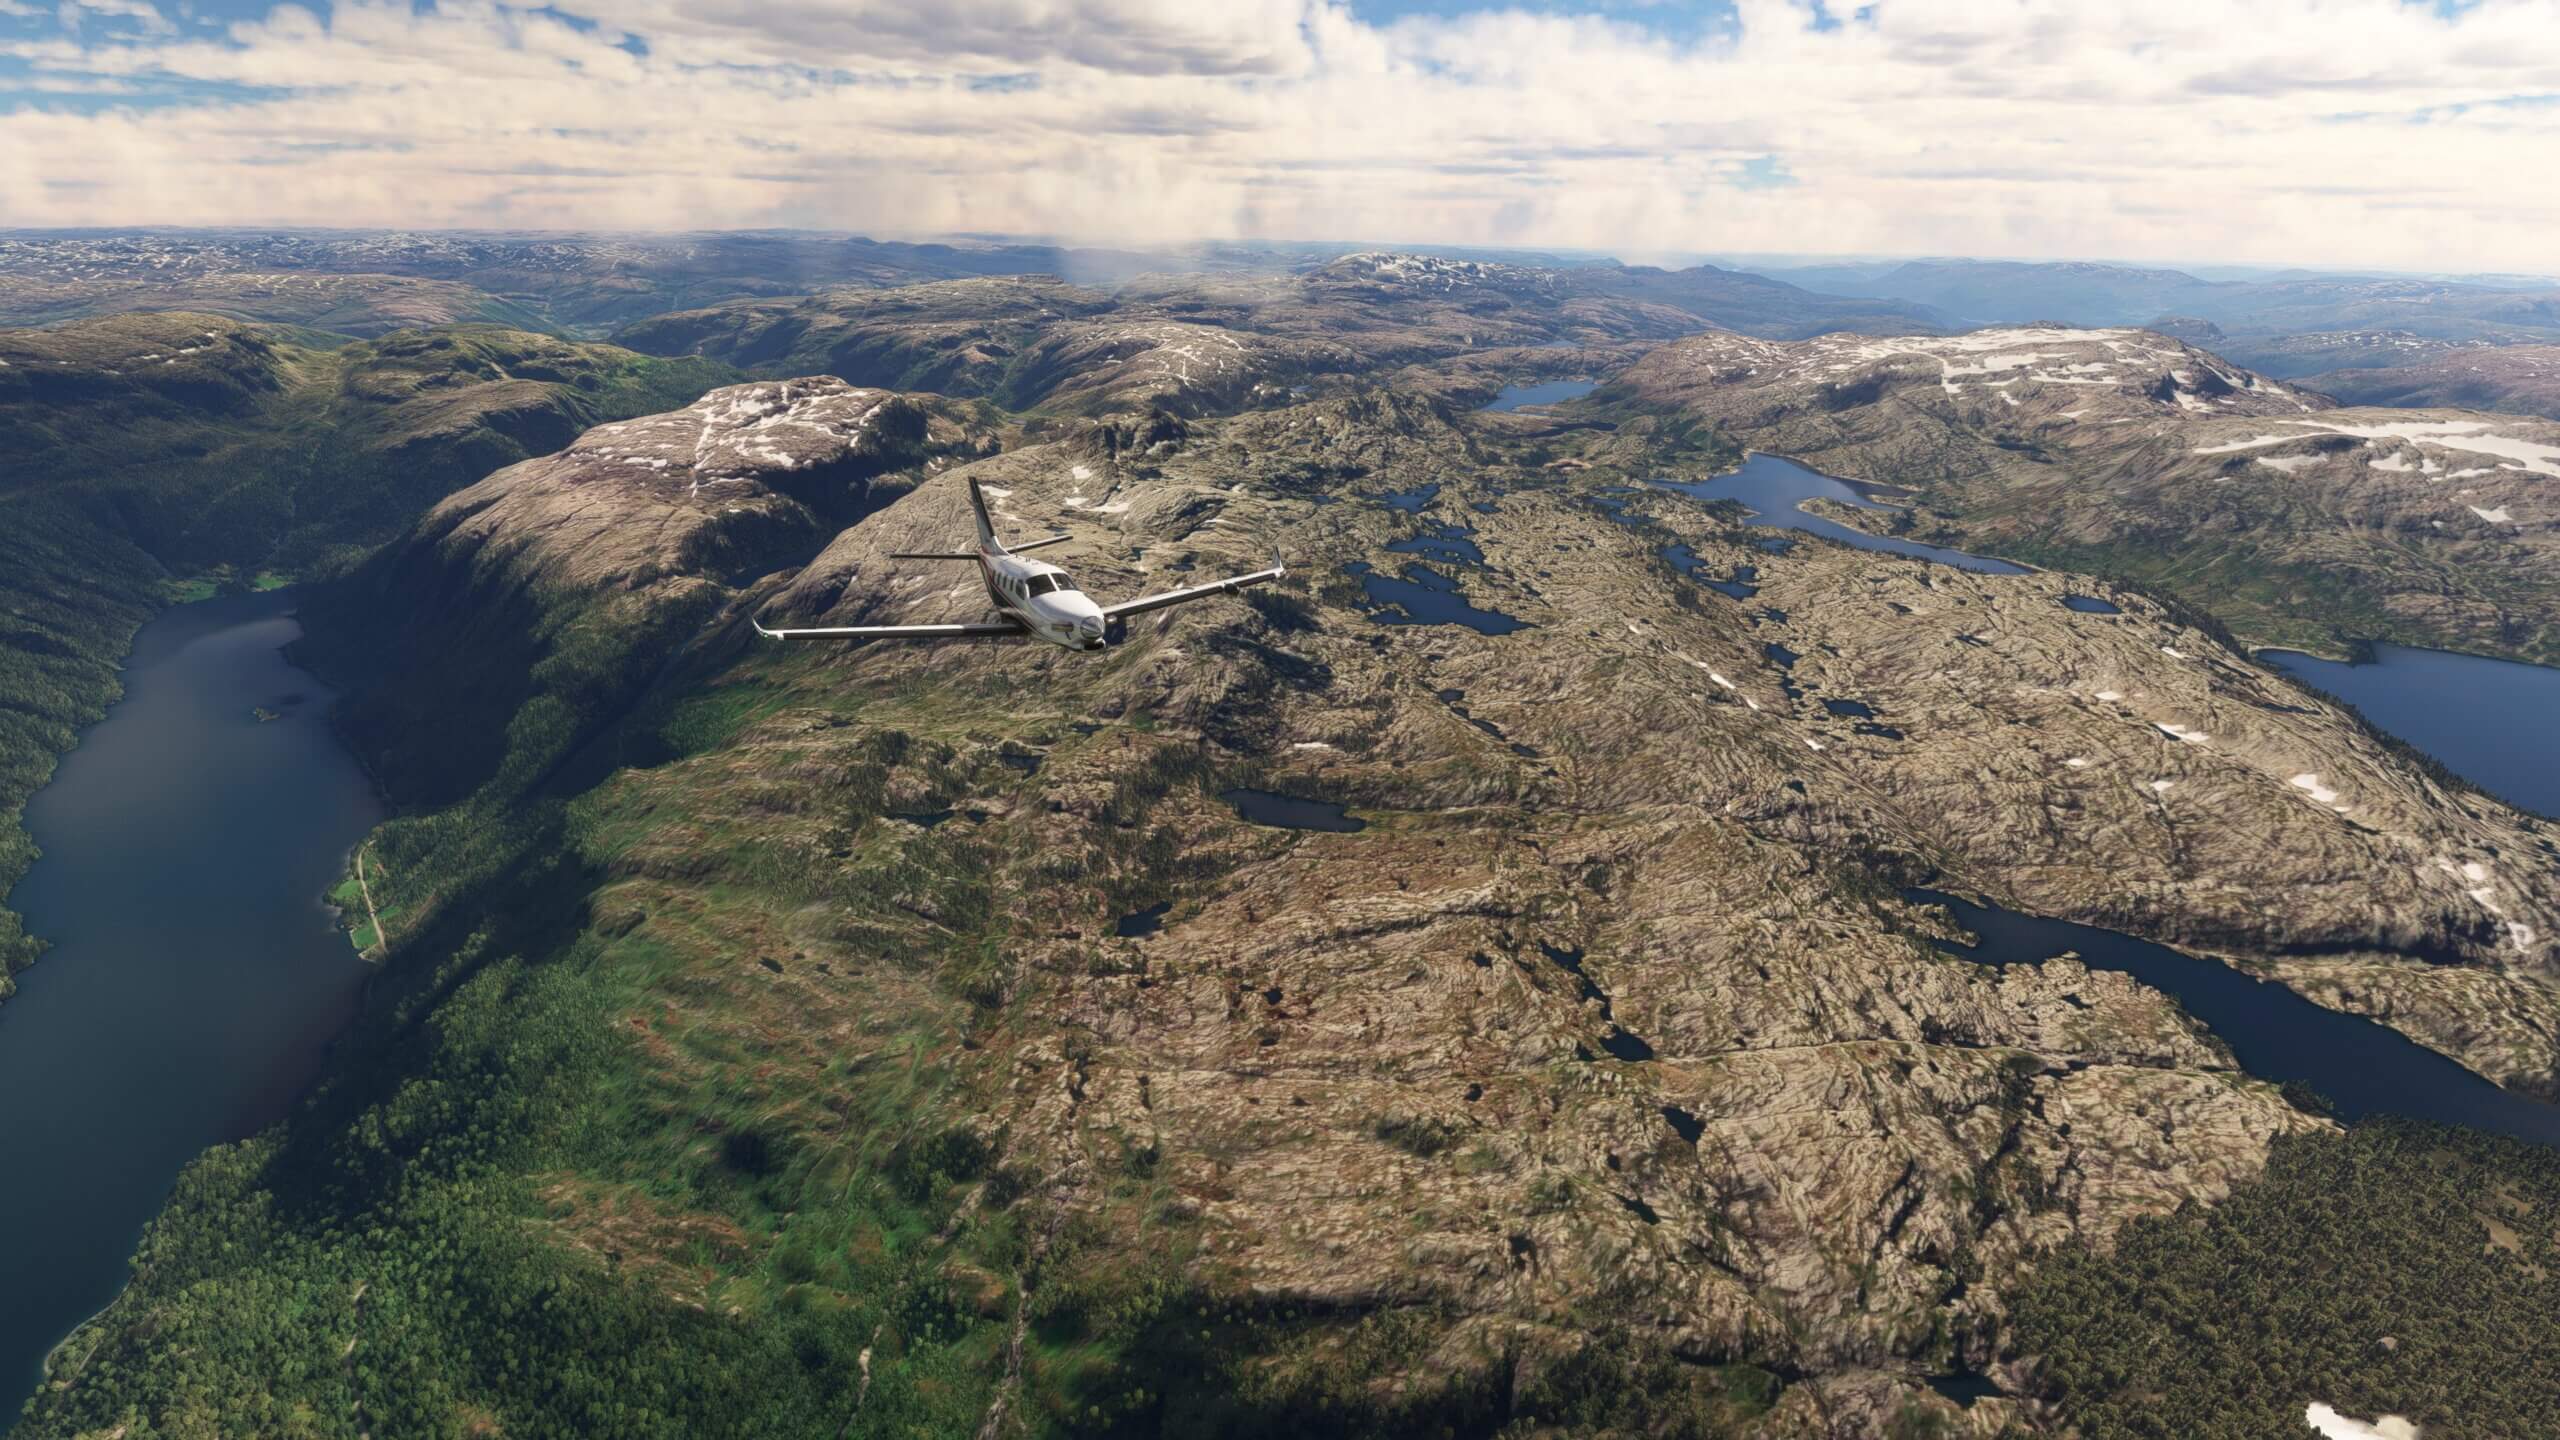 The TBM 930 passes low over rocky terrain, with scattered clouds above